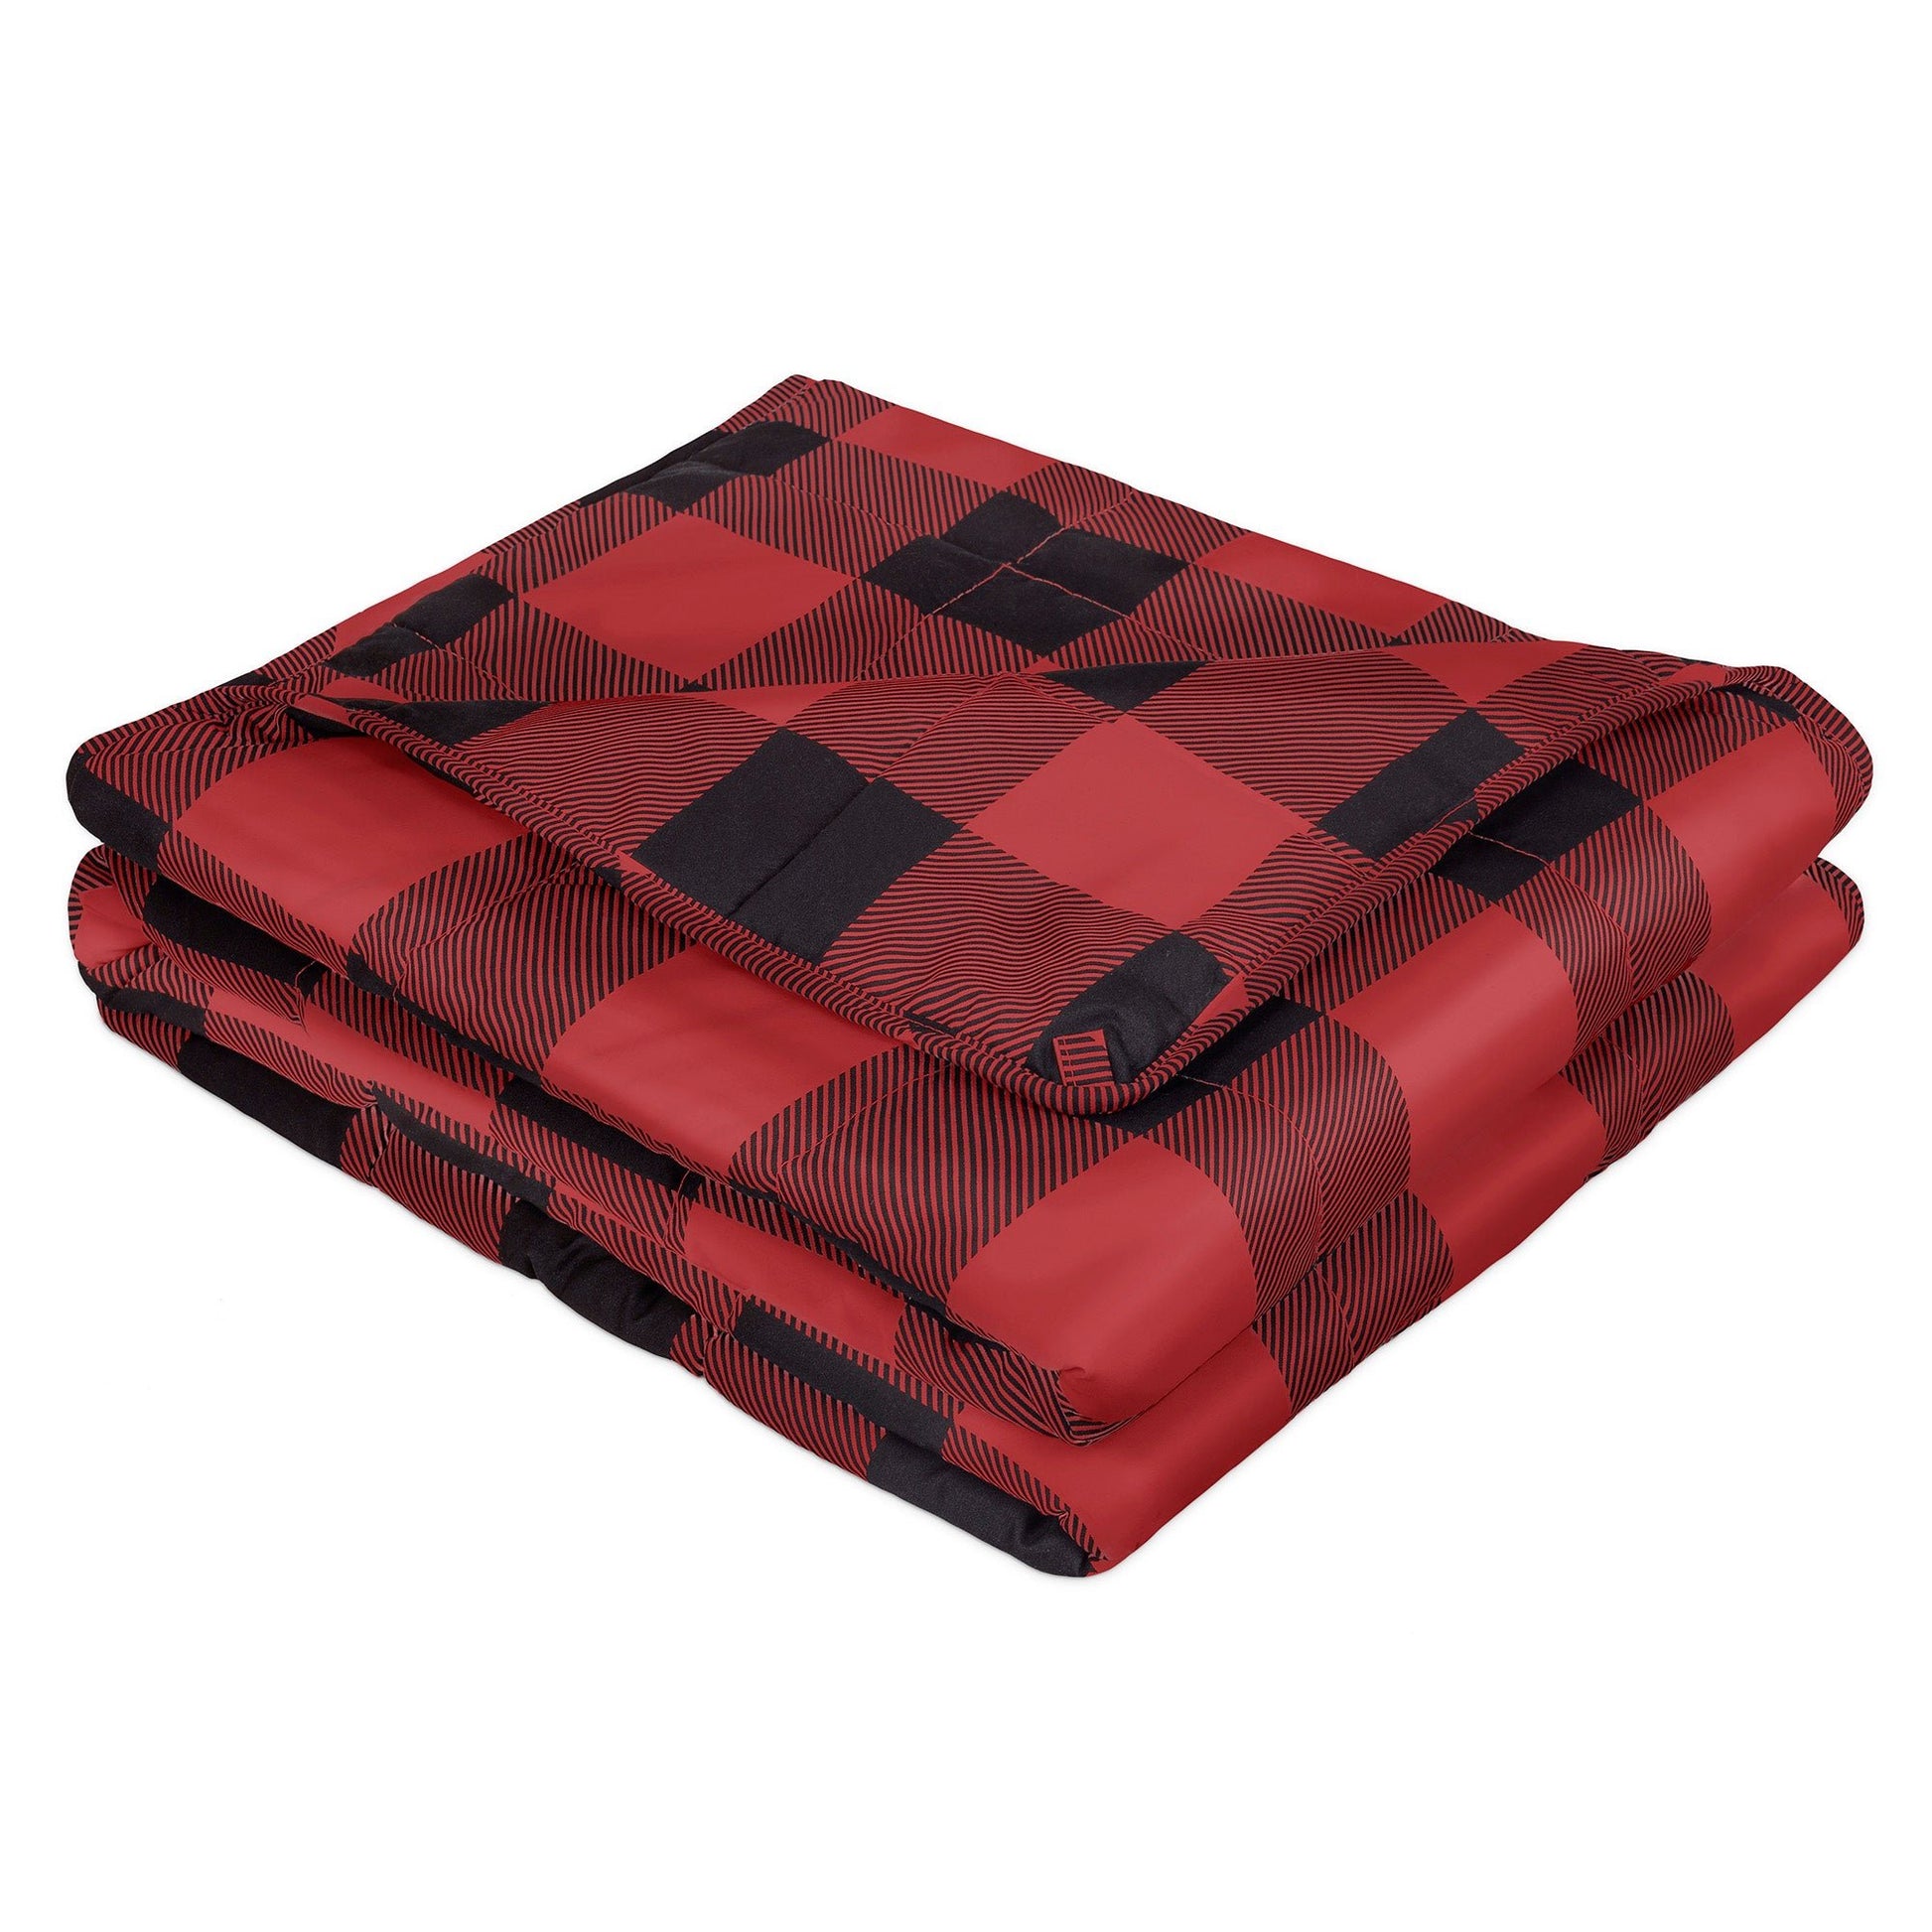 Super Soft Woven Weighted Blanket Throw Home Decor Bedding 48x72 Black and Red - DecoElegance - Blanket Throw Home Bedding